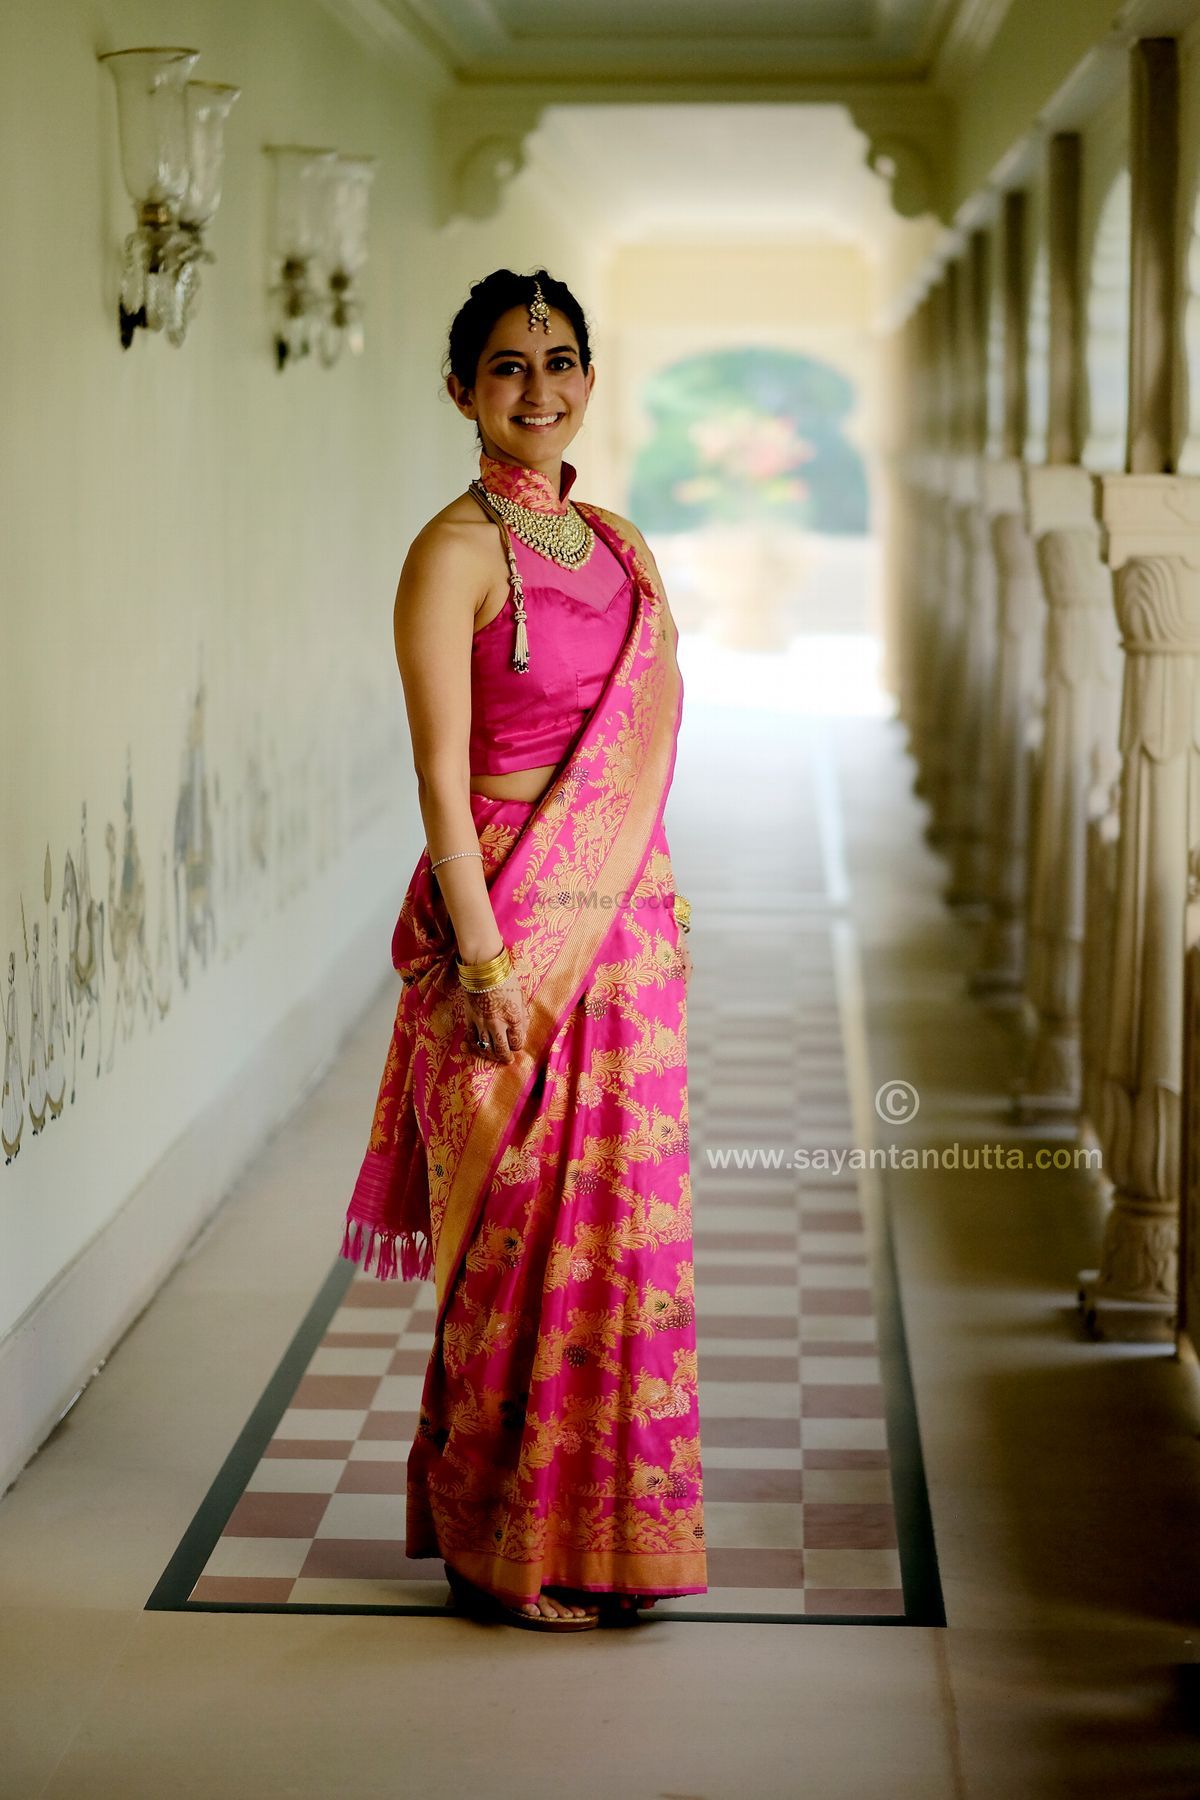 Unique Saree Draping Styles You Can Try! | WedMeGood